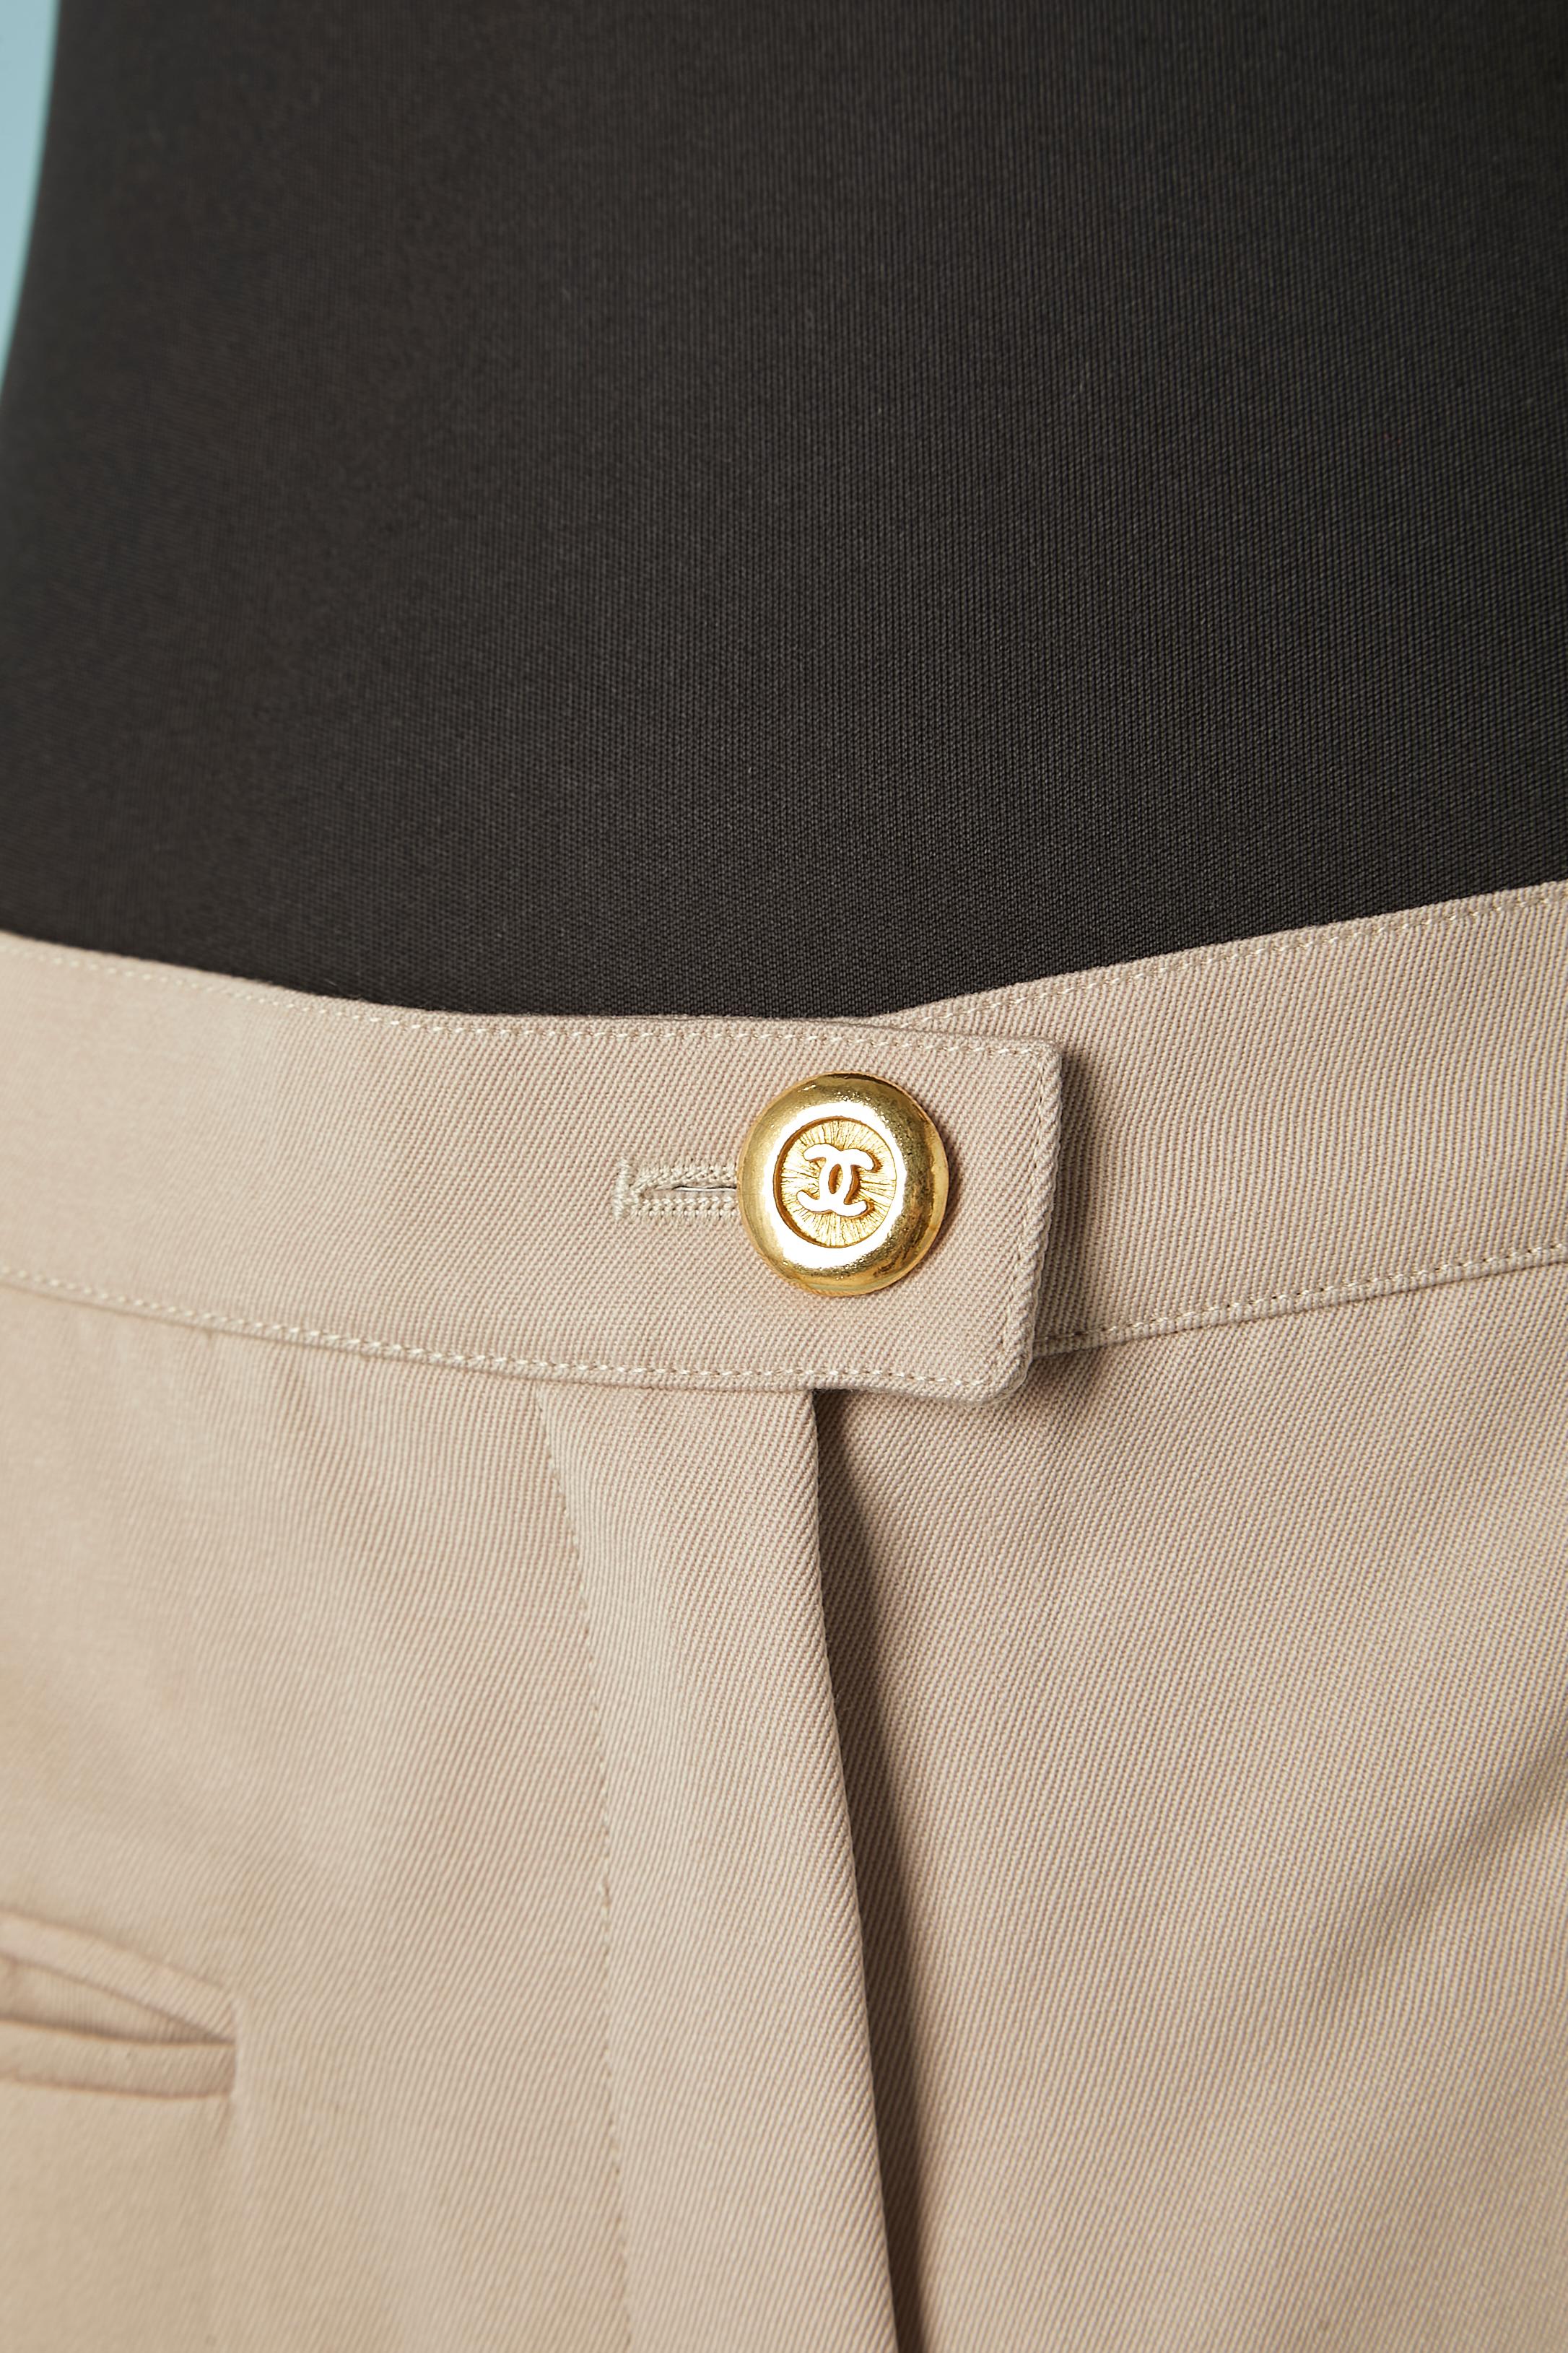 Beige thin wool trouser with branded buttons CHANEL  In Excellent Condition For Sale In Saint-Ouen-Sur-Seine, FR